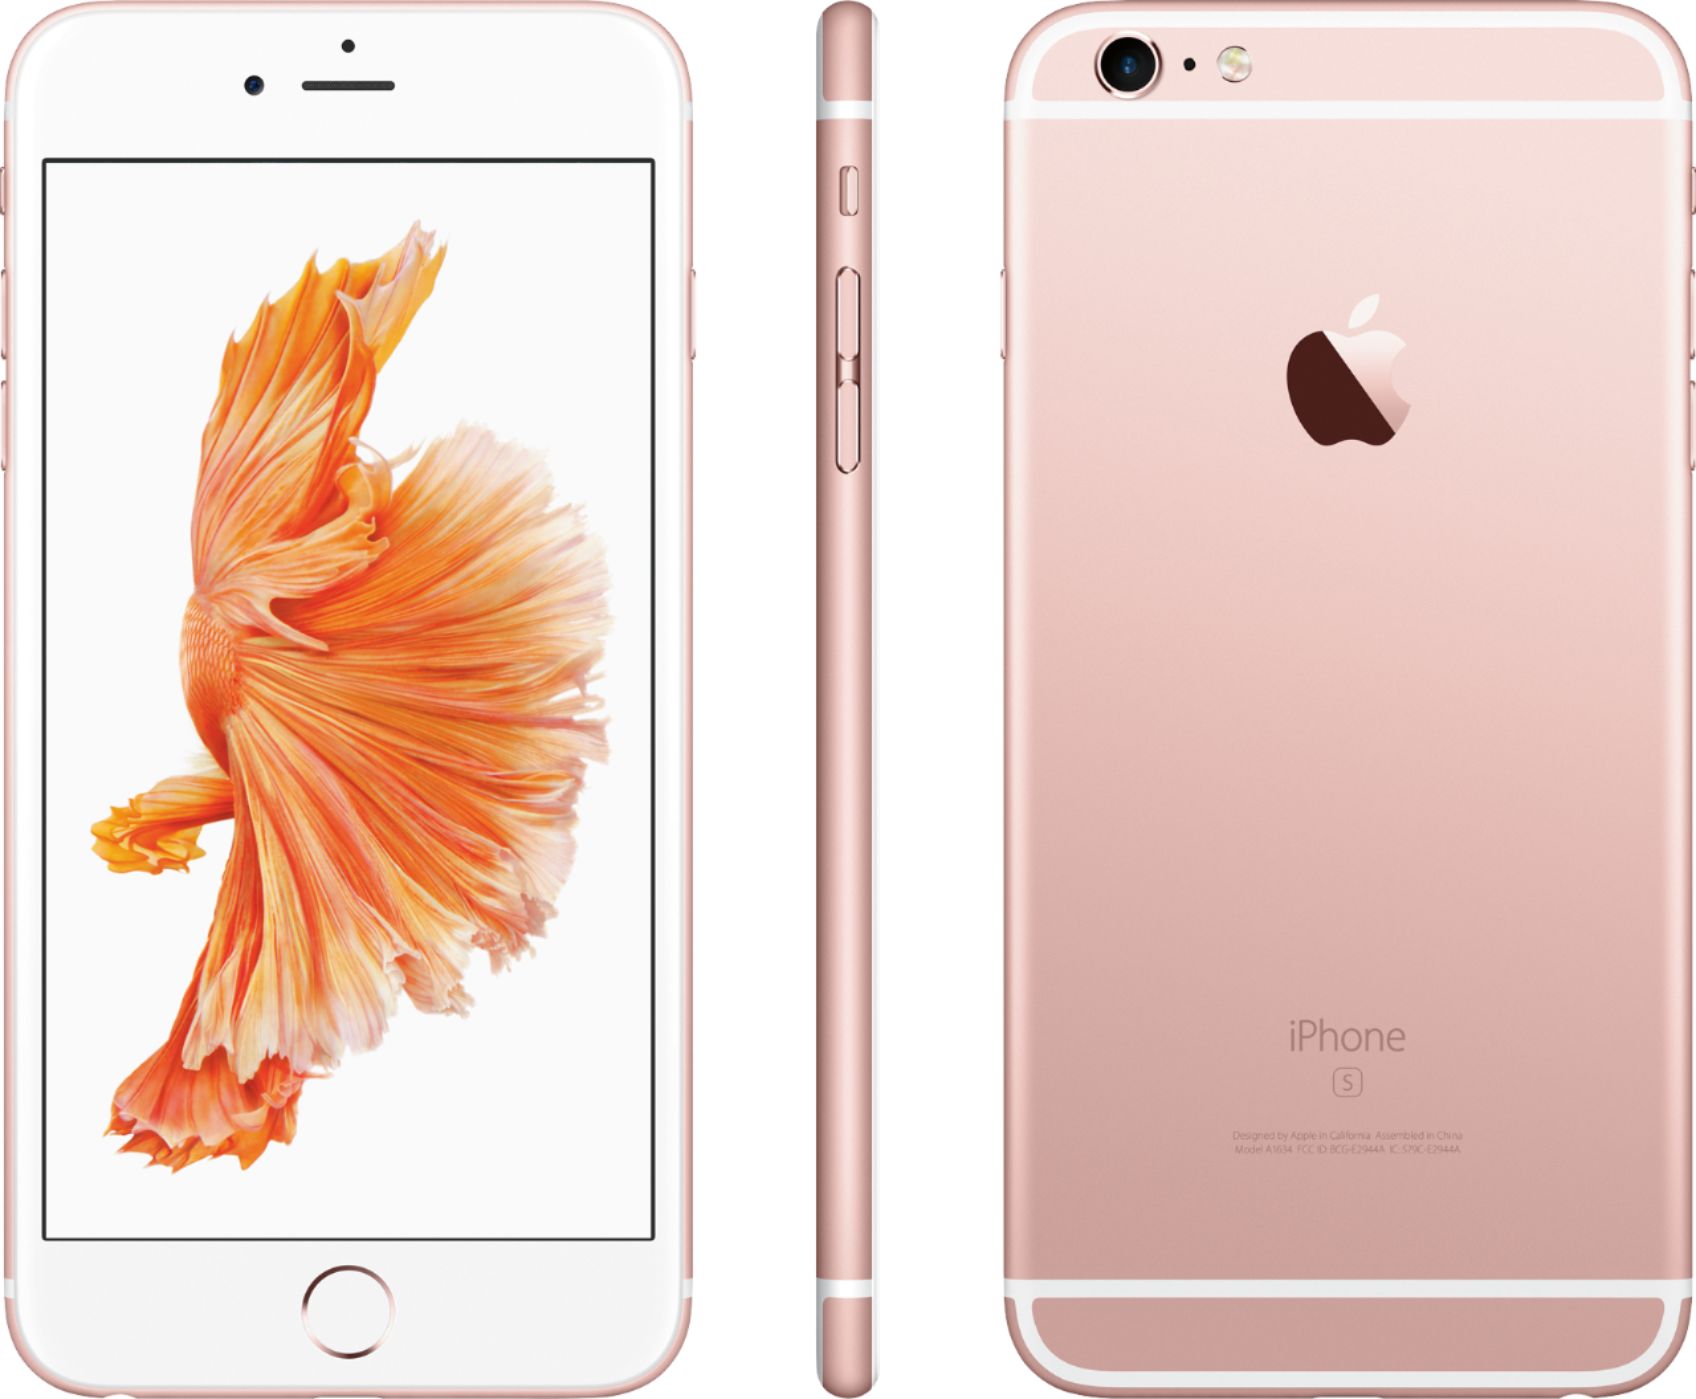 Kaal tempo premie Apple iPhone 6s Plus 32GB Rose gold MN372LL/A - Best Buy